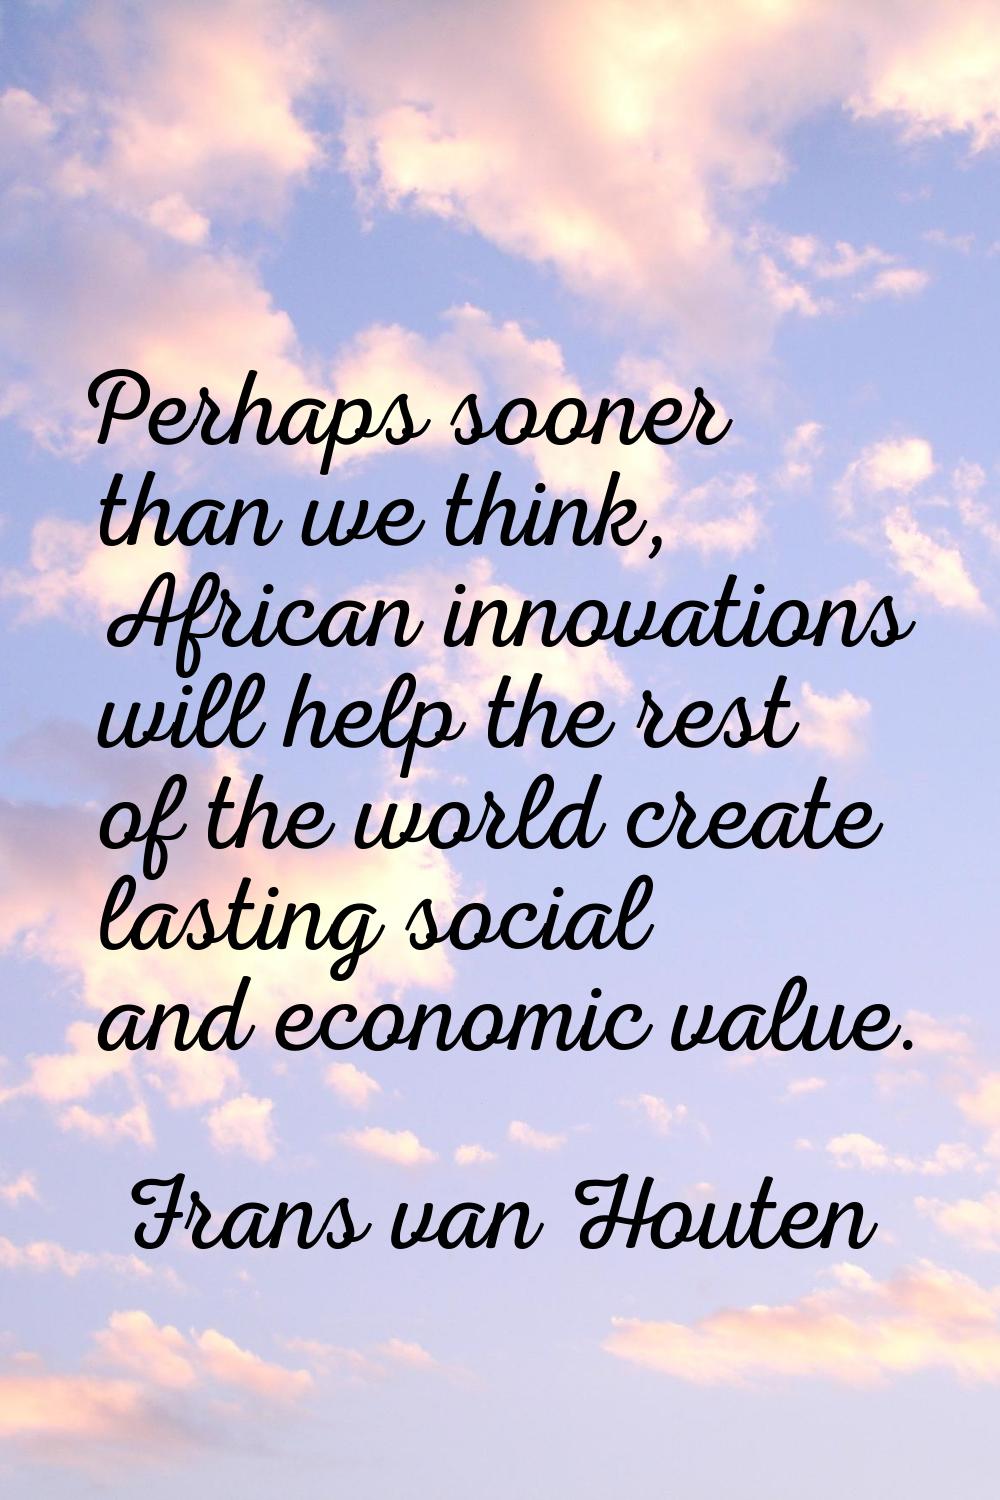 Perhaps sooner than we think, African innovations will help the rest of the world create lasting so